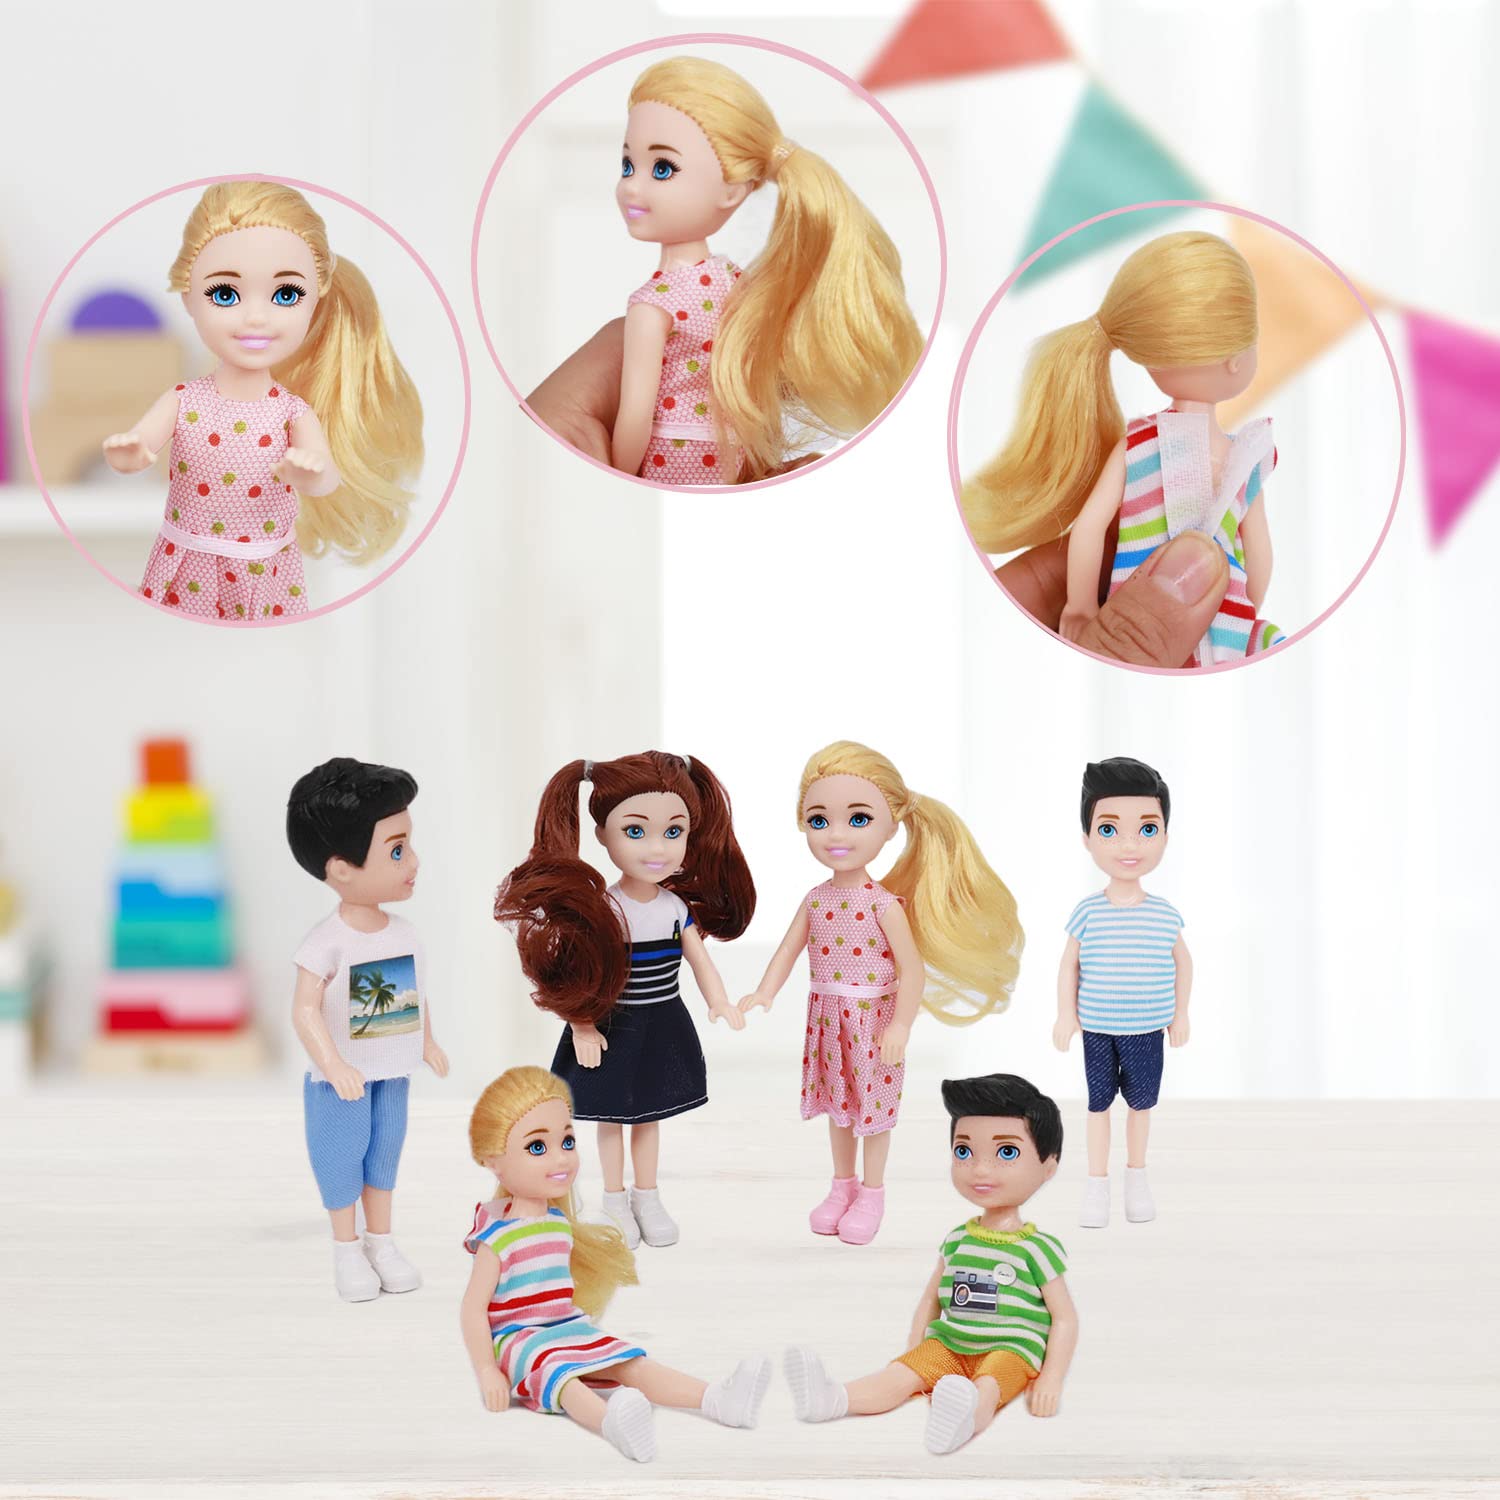 Lembani 10 Sets 5 Inch Mini Dolls with Clothes, 5 Pieces Boy Dolls and 5 Pieces Girl Dolls, Mini Princess Dolls Toy for Dollhouse Kids Gifts